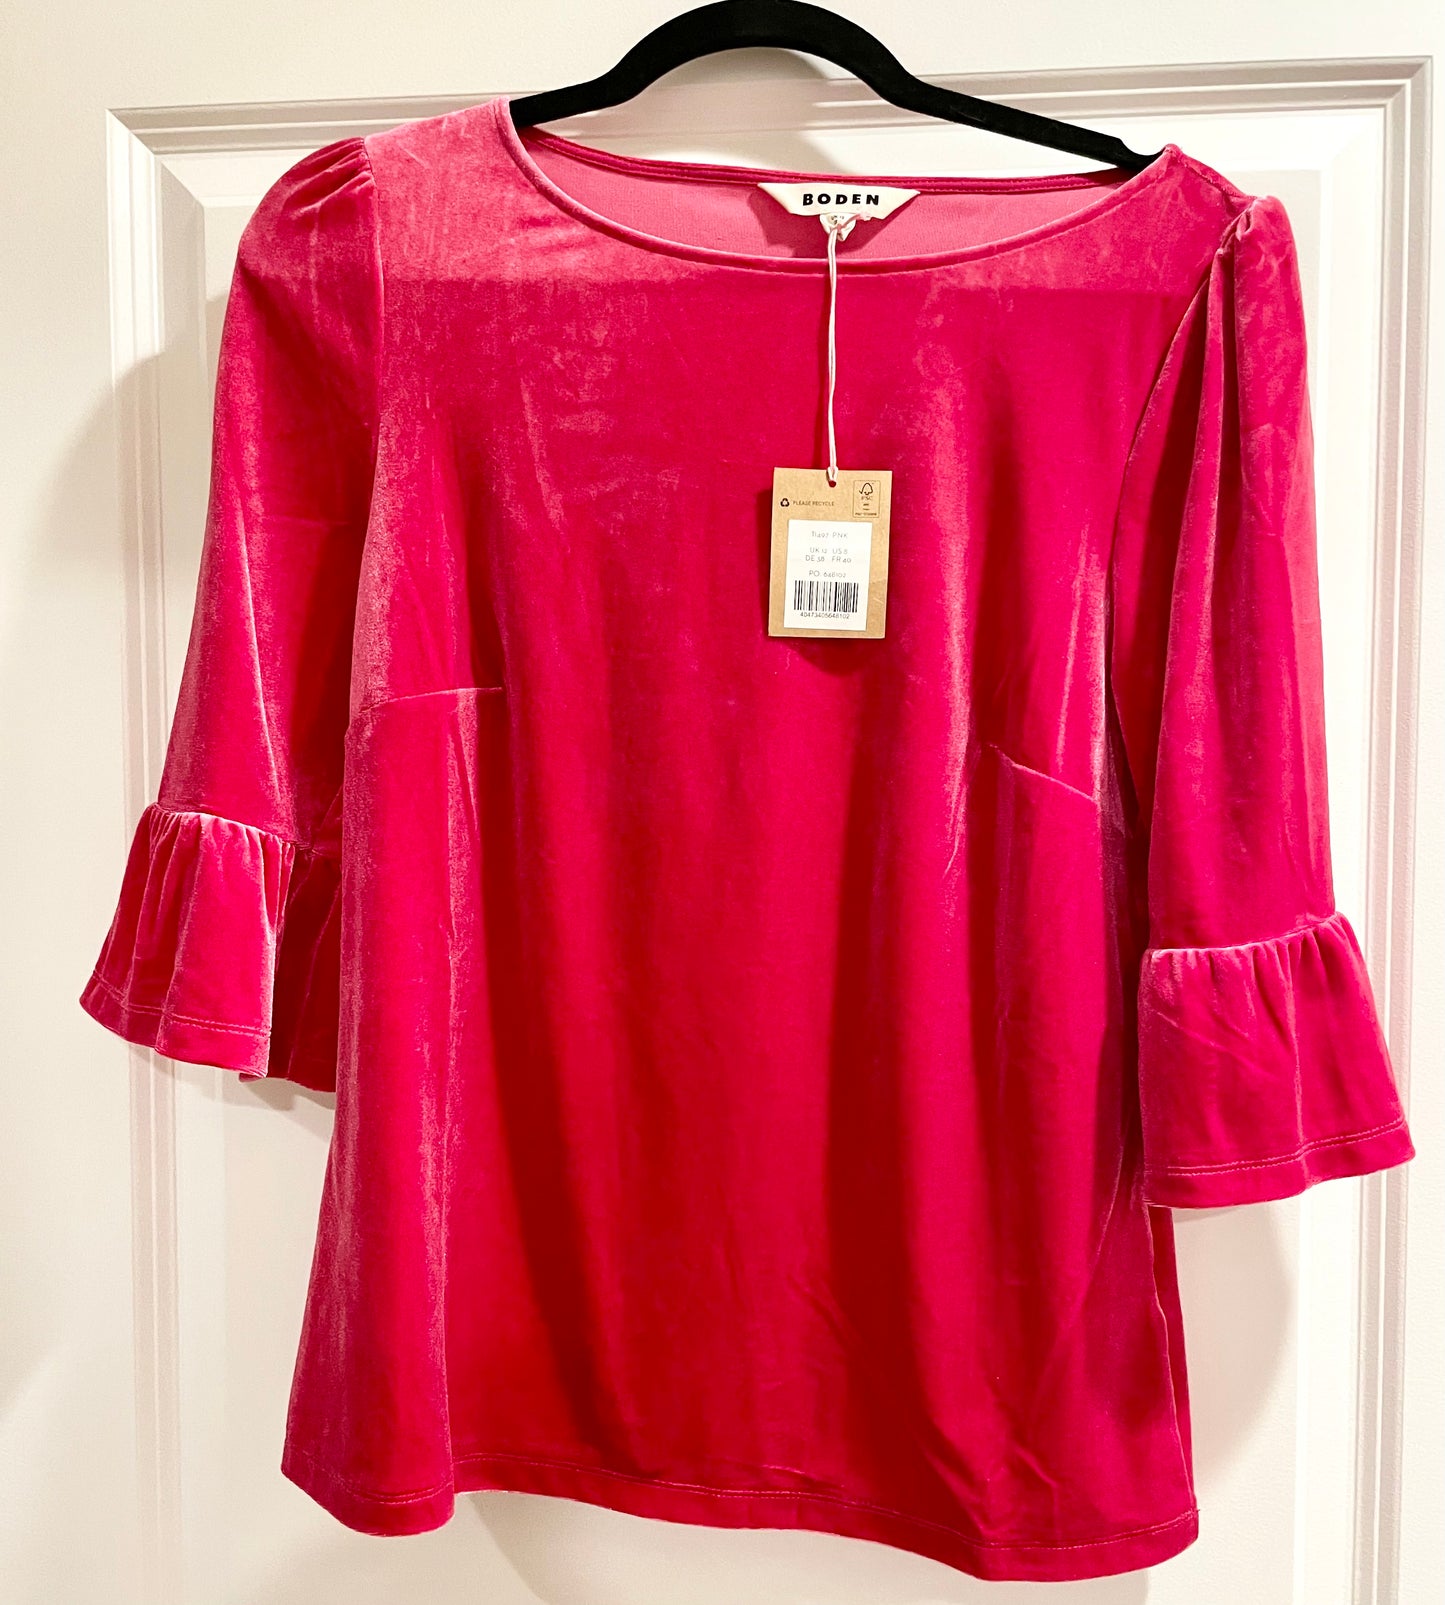 Boden pink top size 8